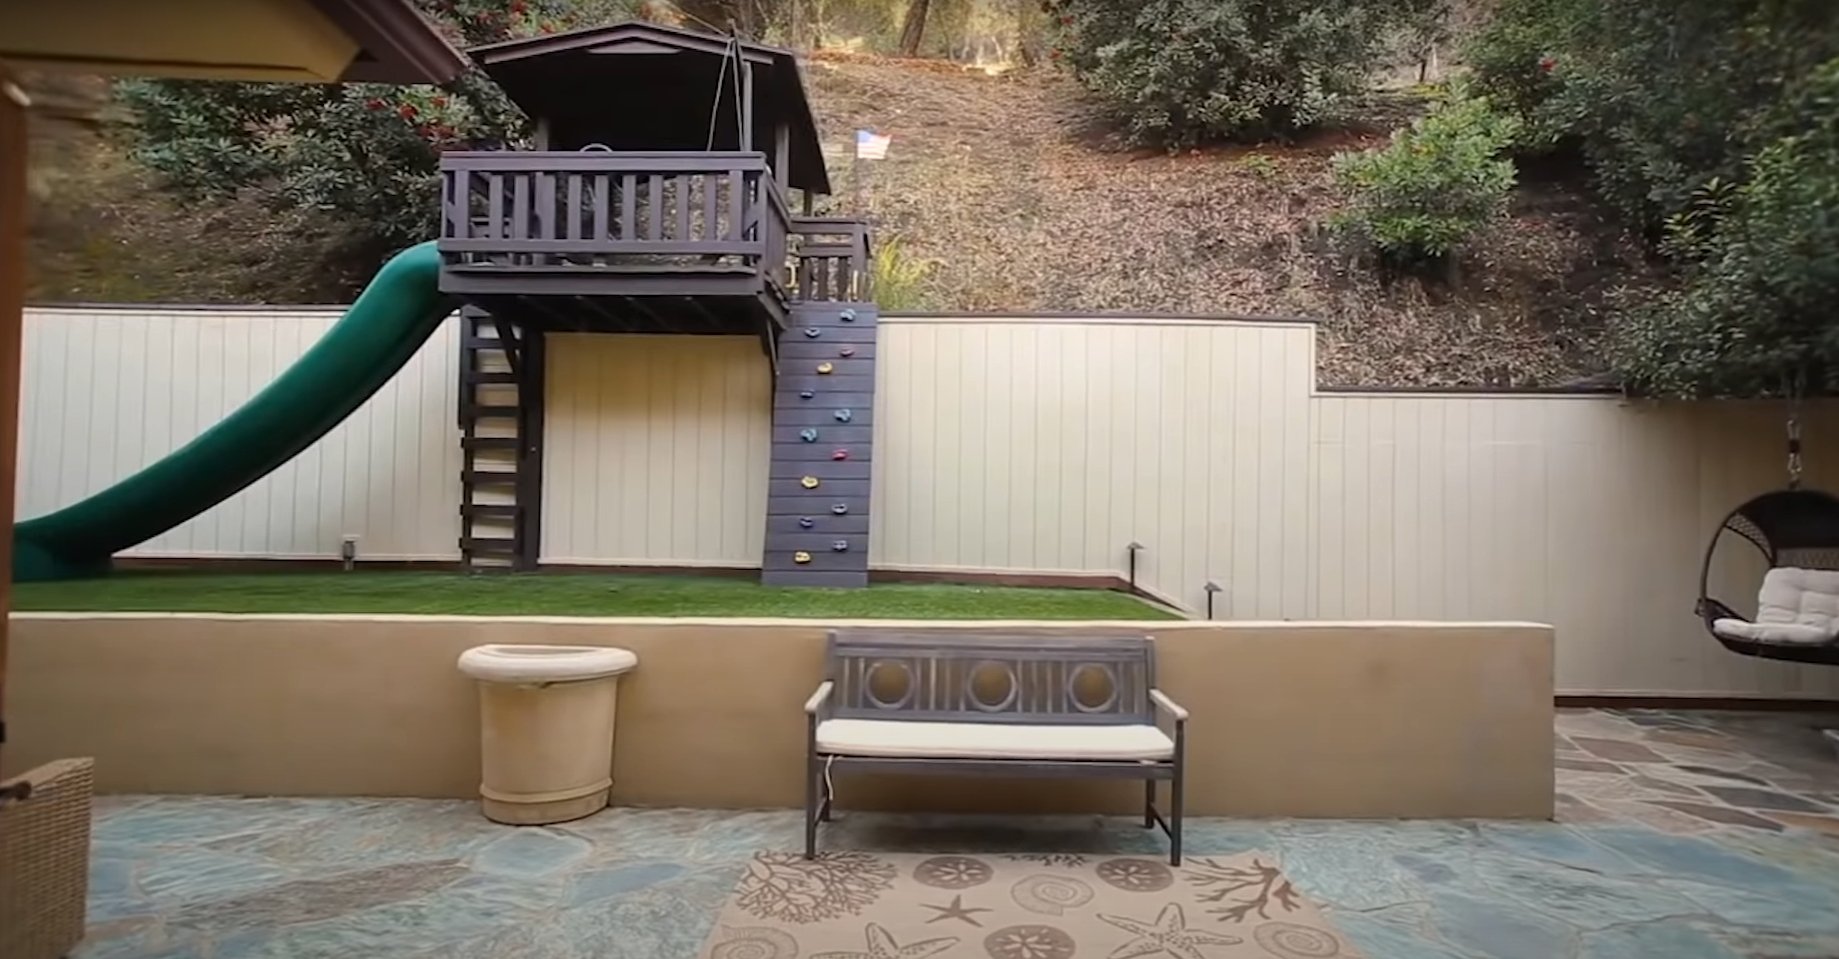 Inside Dwayne Johnson's Beverly Park home | Photo: YouTube/TheRichest